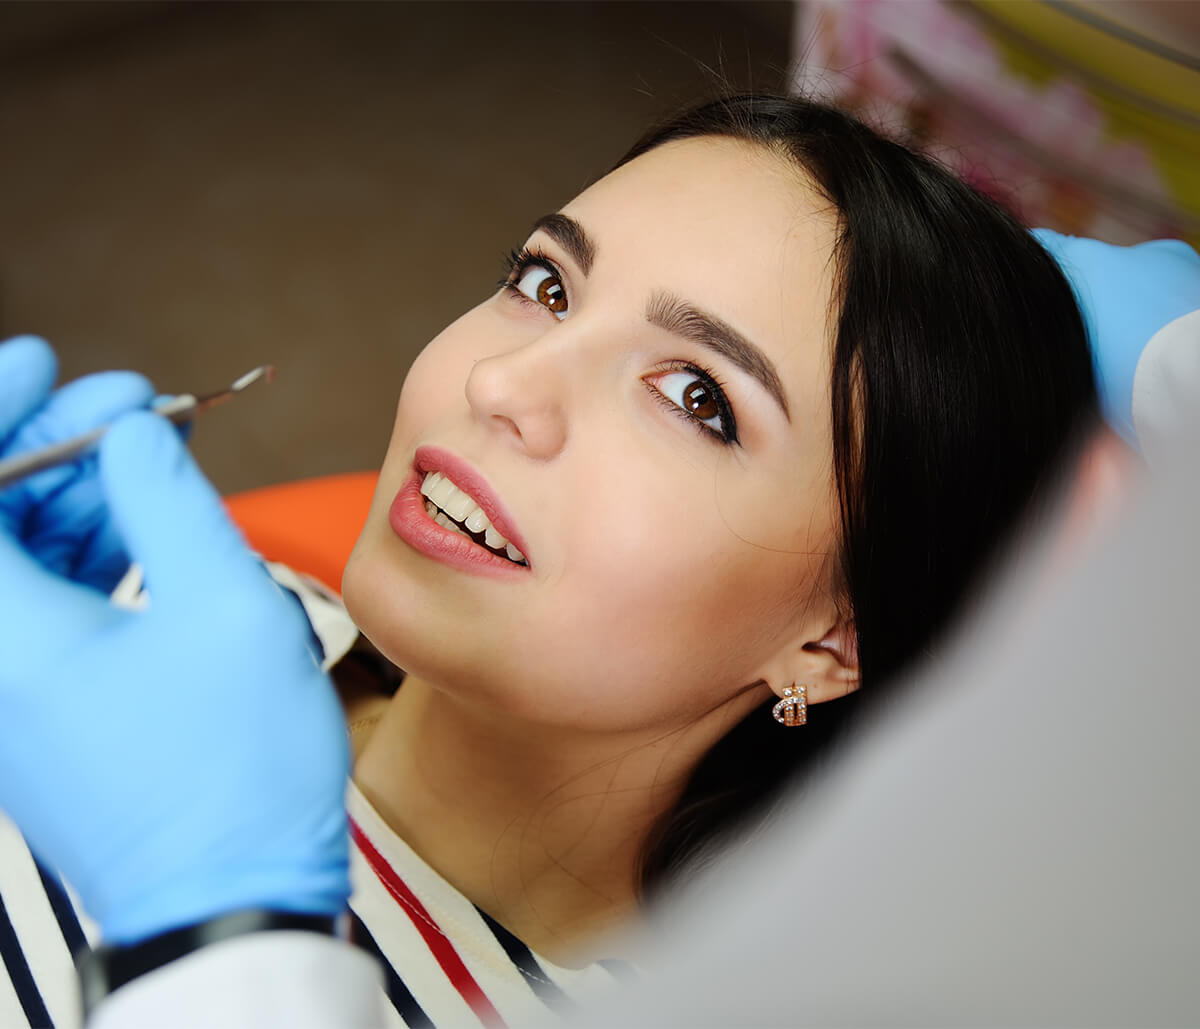 Managing Pain After Tooth Extraction in Houston TX Area